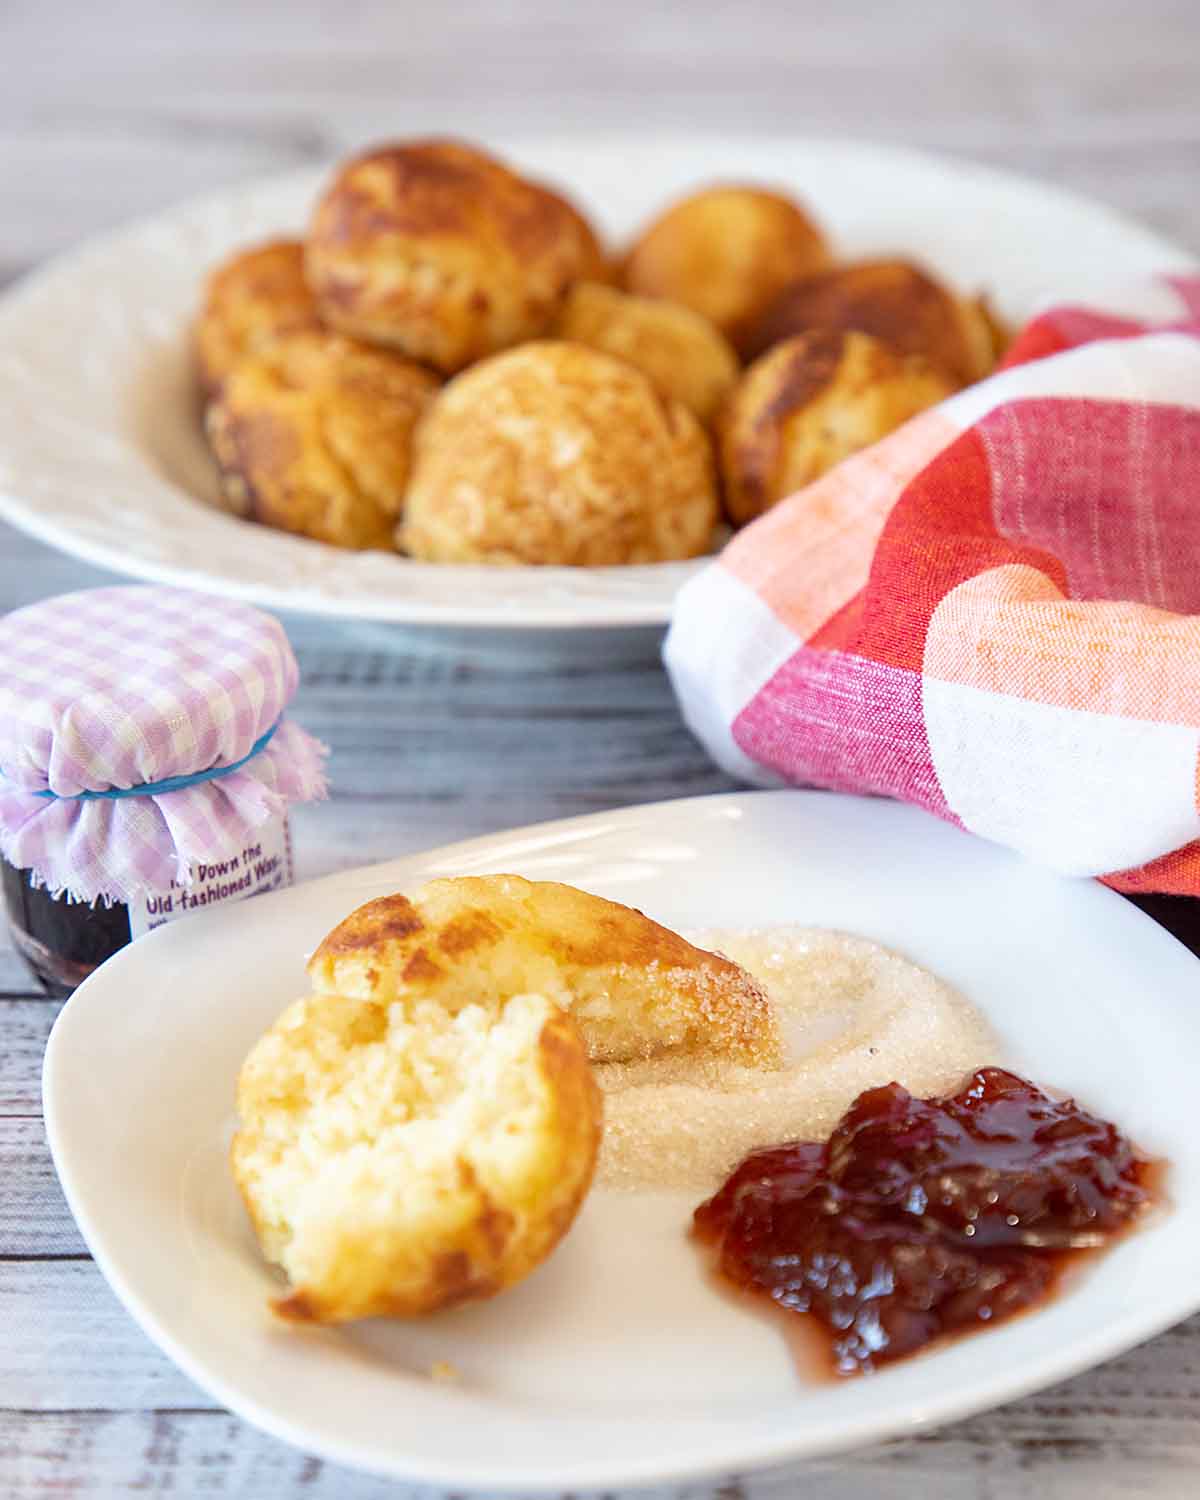 With a rich moist interior and a delicately crisp exterior, Aebleskivers, Danish Pancake Balls, are a special breakfast treat or snack.